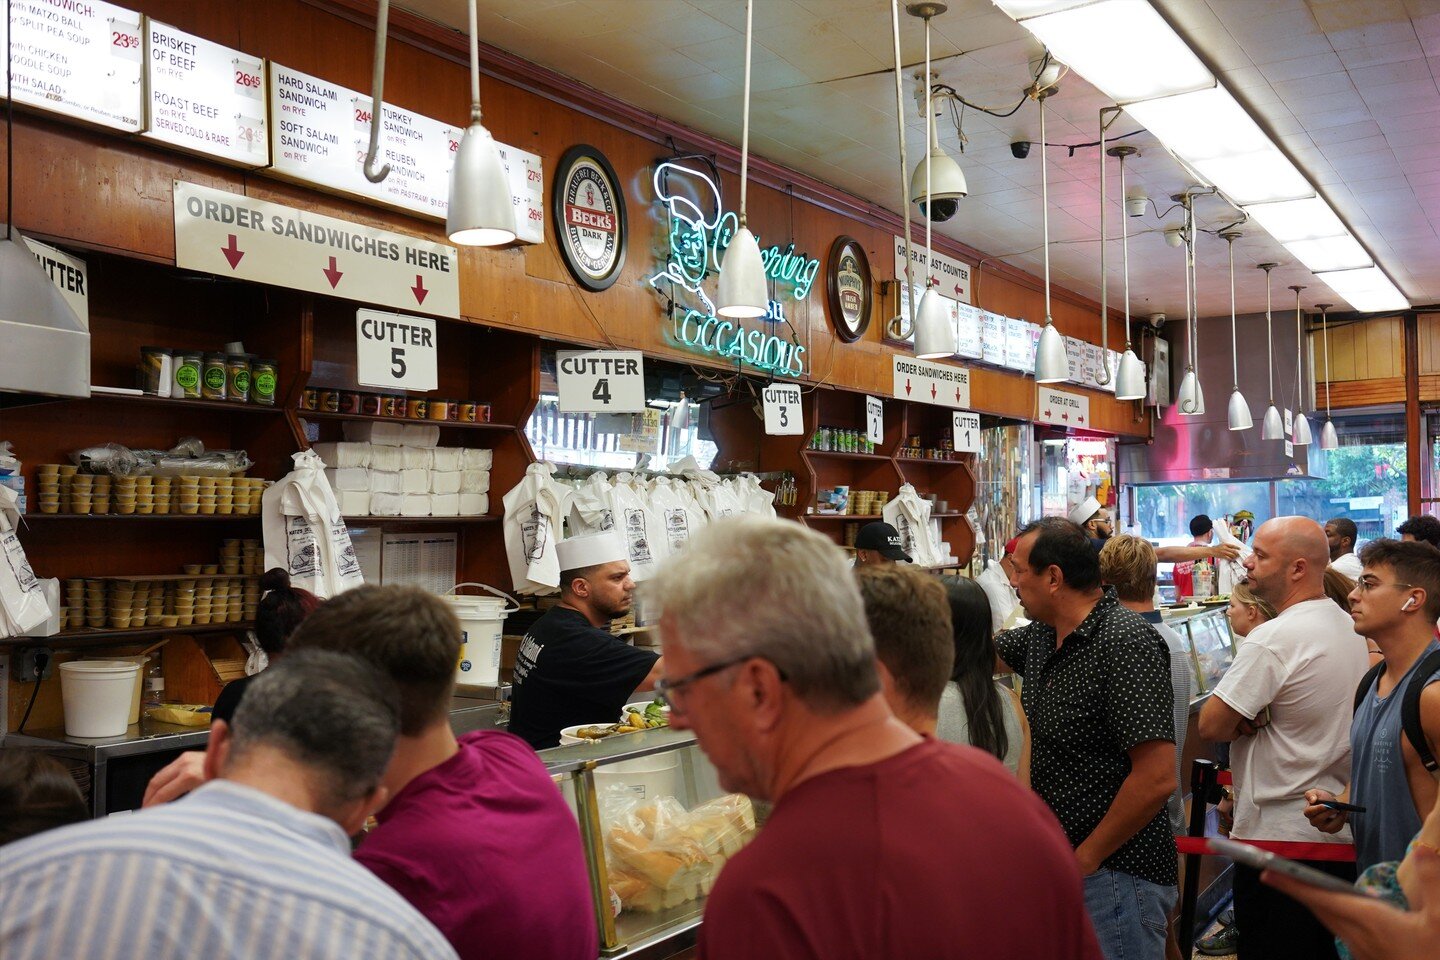 From the Life Log series on their first visit to NY.

Hungry and rushing in was Katz's in Lower East.

Founded in 1888, this delicatessen is one of the oldest in New York and is famous for its hearty pastrami sandwiches. The old-fashioned interior is